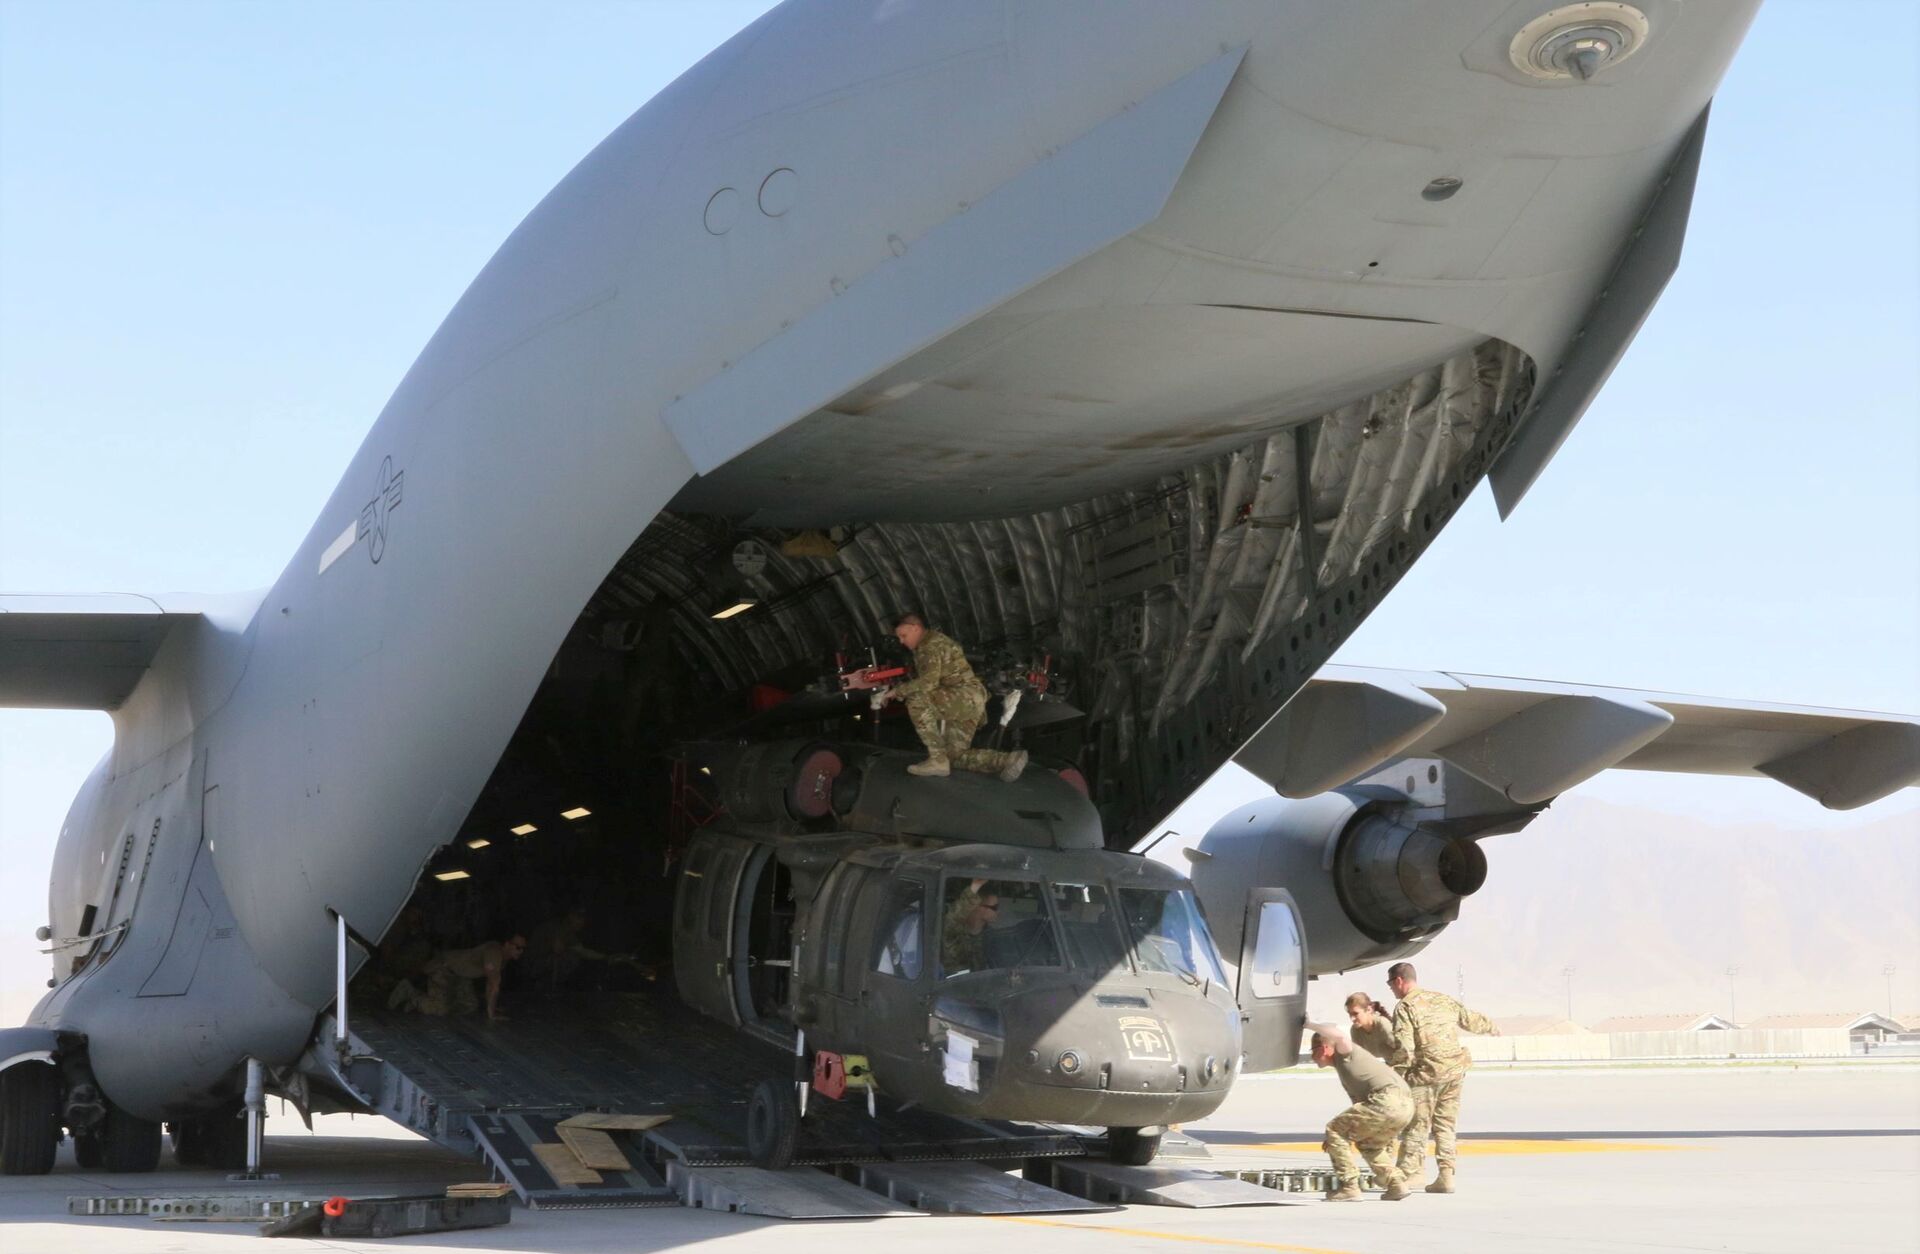 Aerial porters work with maintainers to load a UH-60L Blackhawk helicopter into a U.S. Air Force C-17 Globemaster III during the withdrawl of American forces in Afghanistan, June 16, 2021. Picture taken June 16, 2021 - Sputnik International, 1920, 07.09.2021